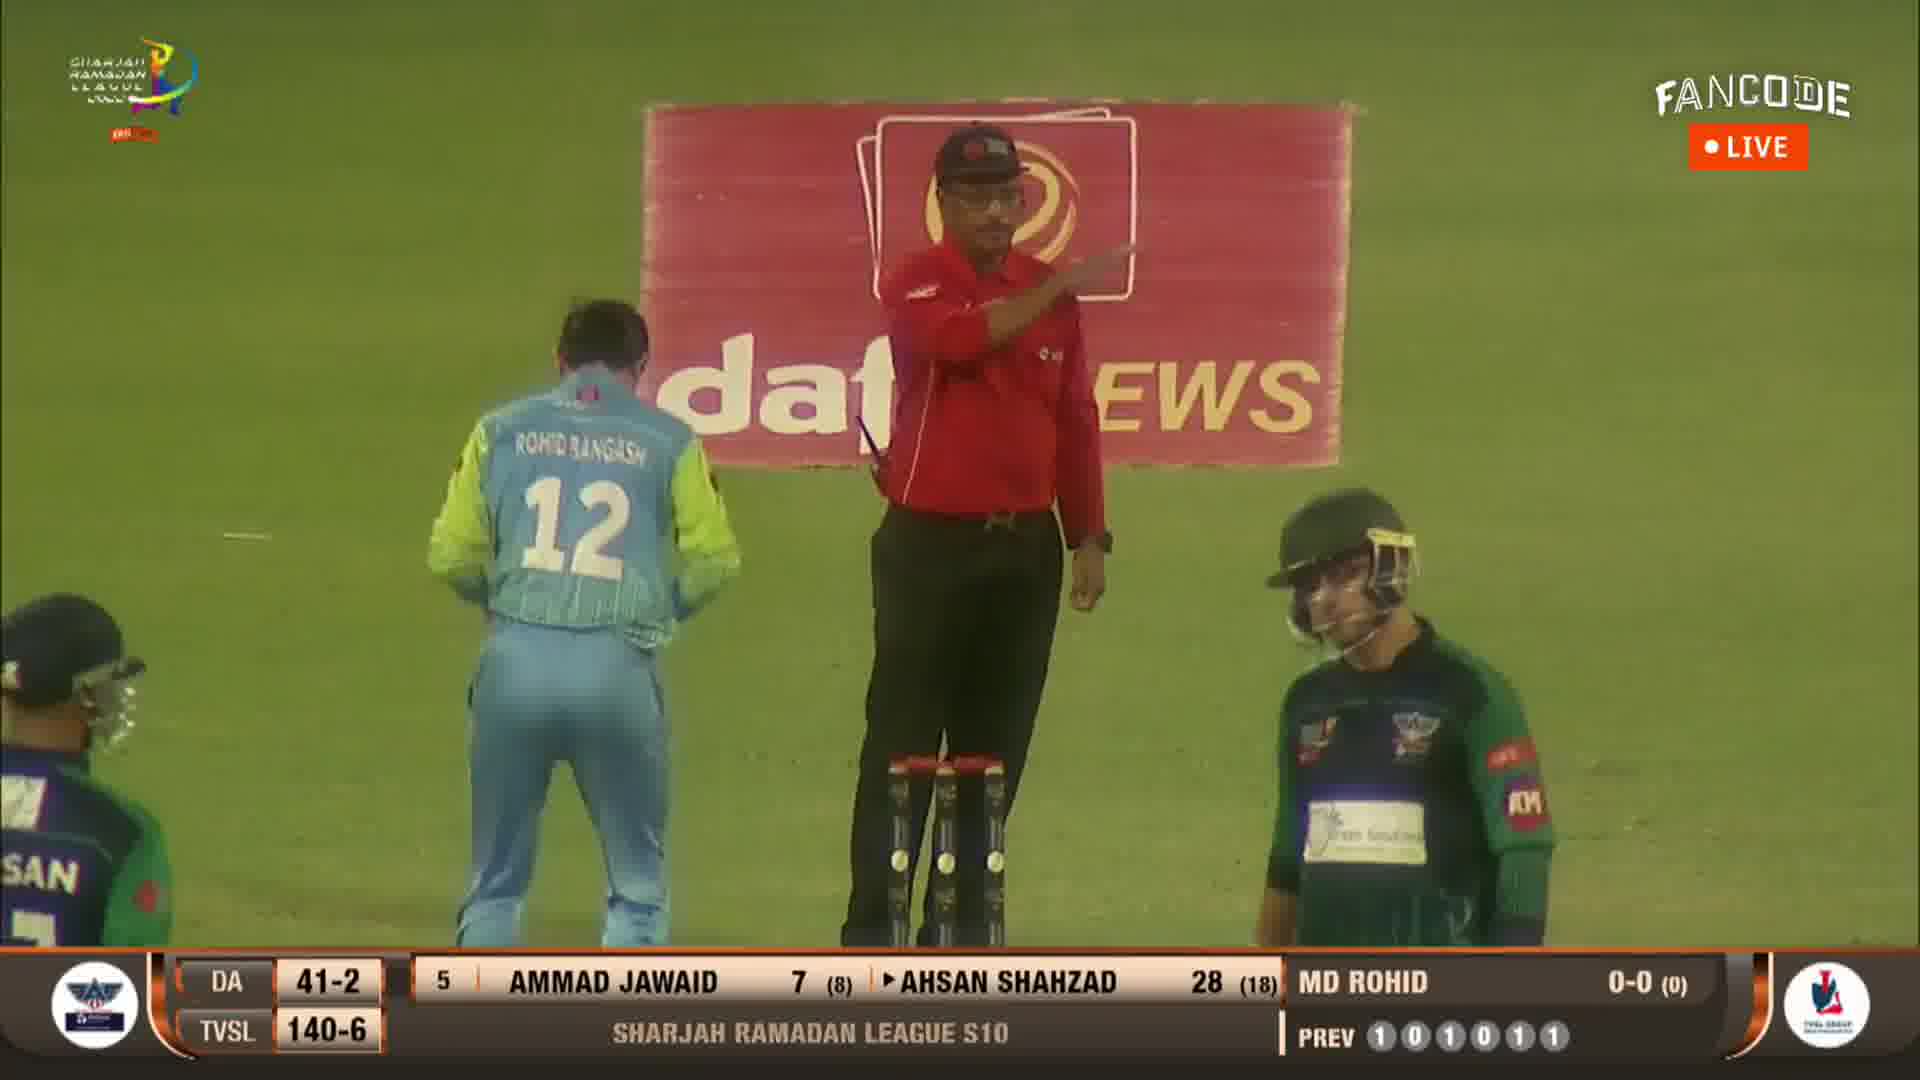 Shahzad finds the gap for a boundary